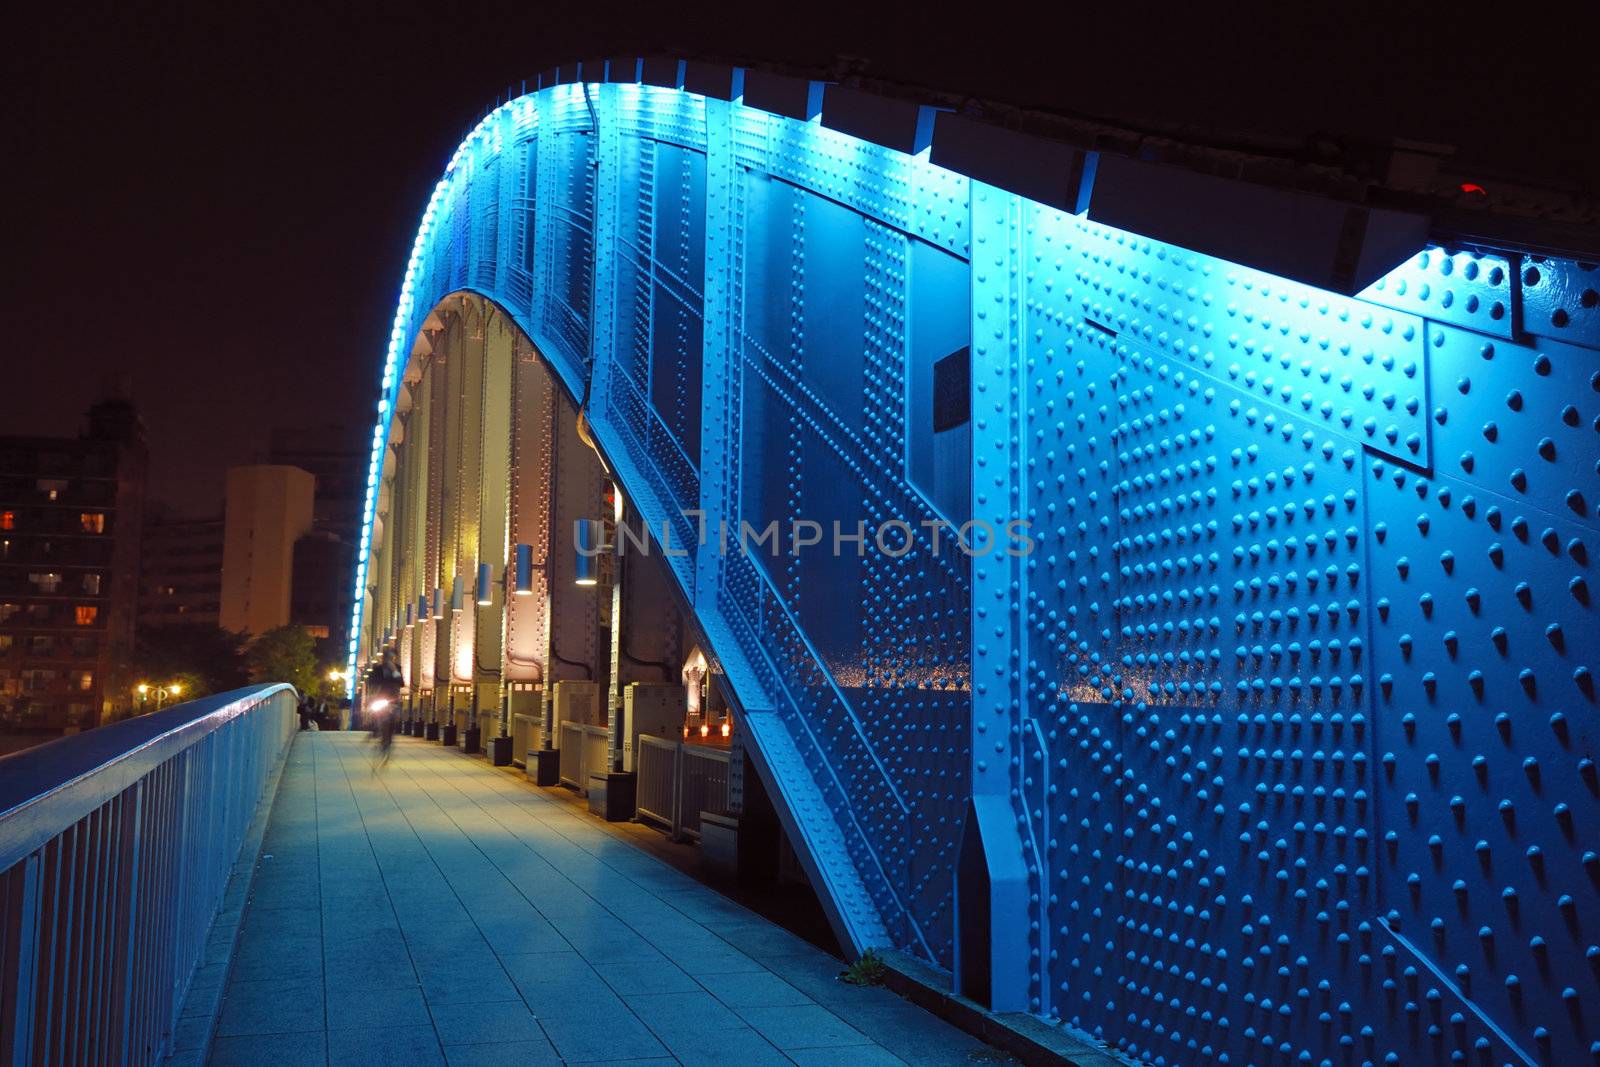 pedestrian way along the metallic arc structure of Eitai bridge with moving bicycle by night time in Tokyo Japan; focus on metallic structure